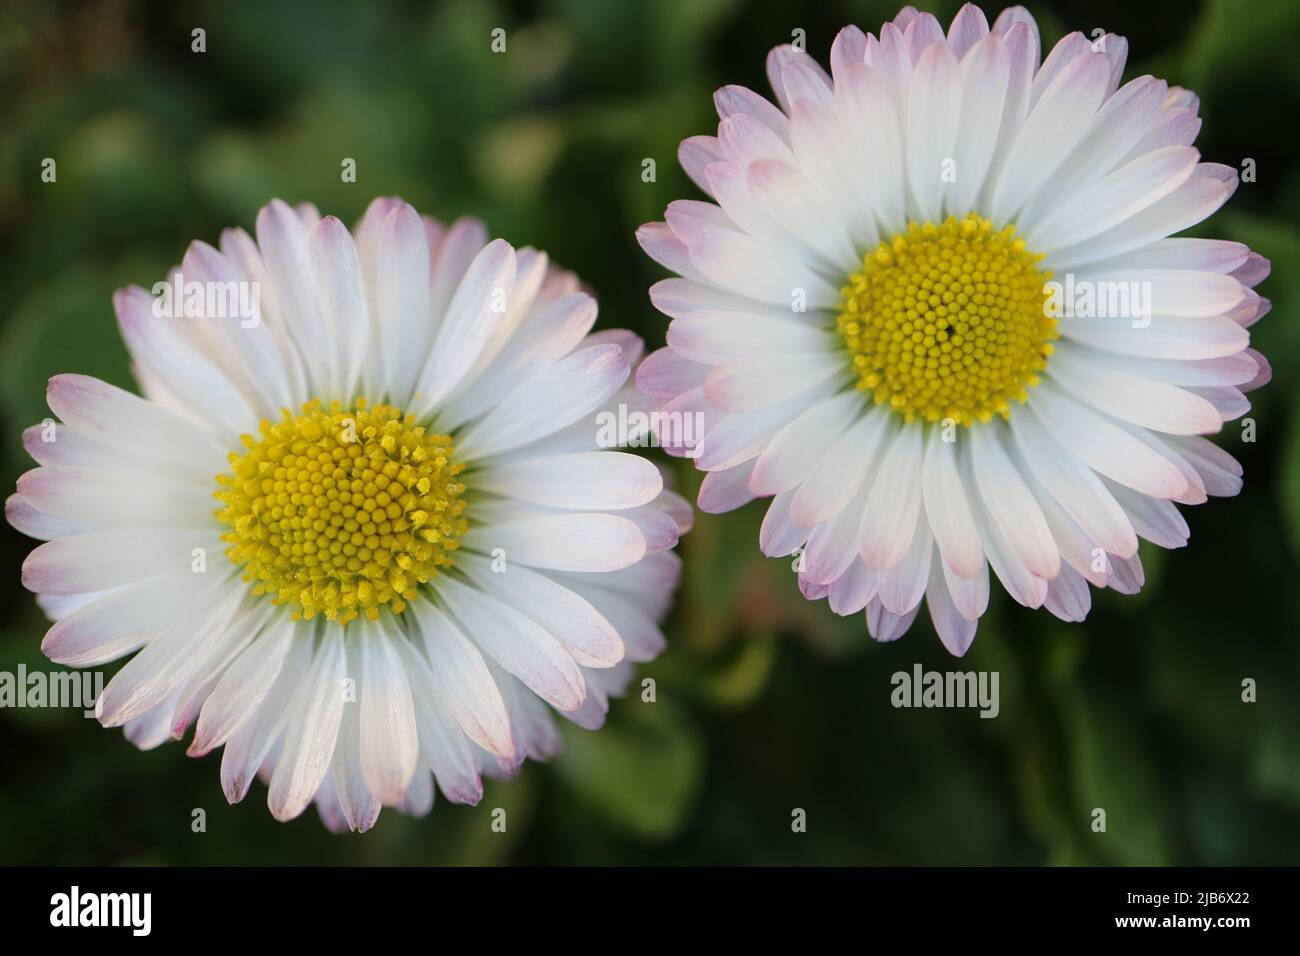 Two white common daisies with  yellow stamens  and green leaves,  spring daisies in the garden, flower head macro, beauty in nature, floral photo Stock Photo